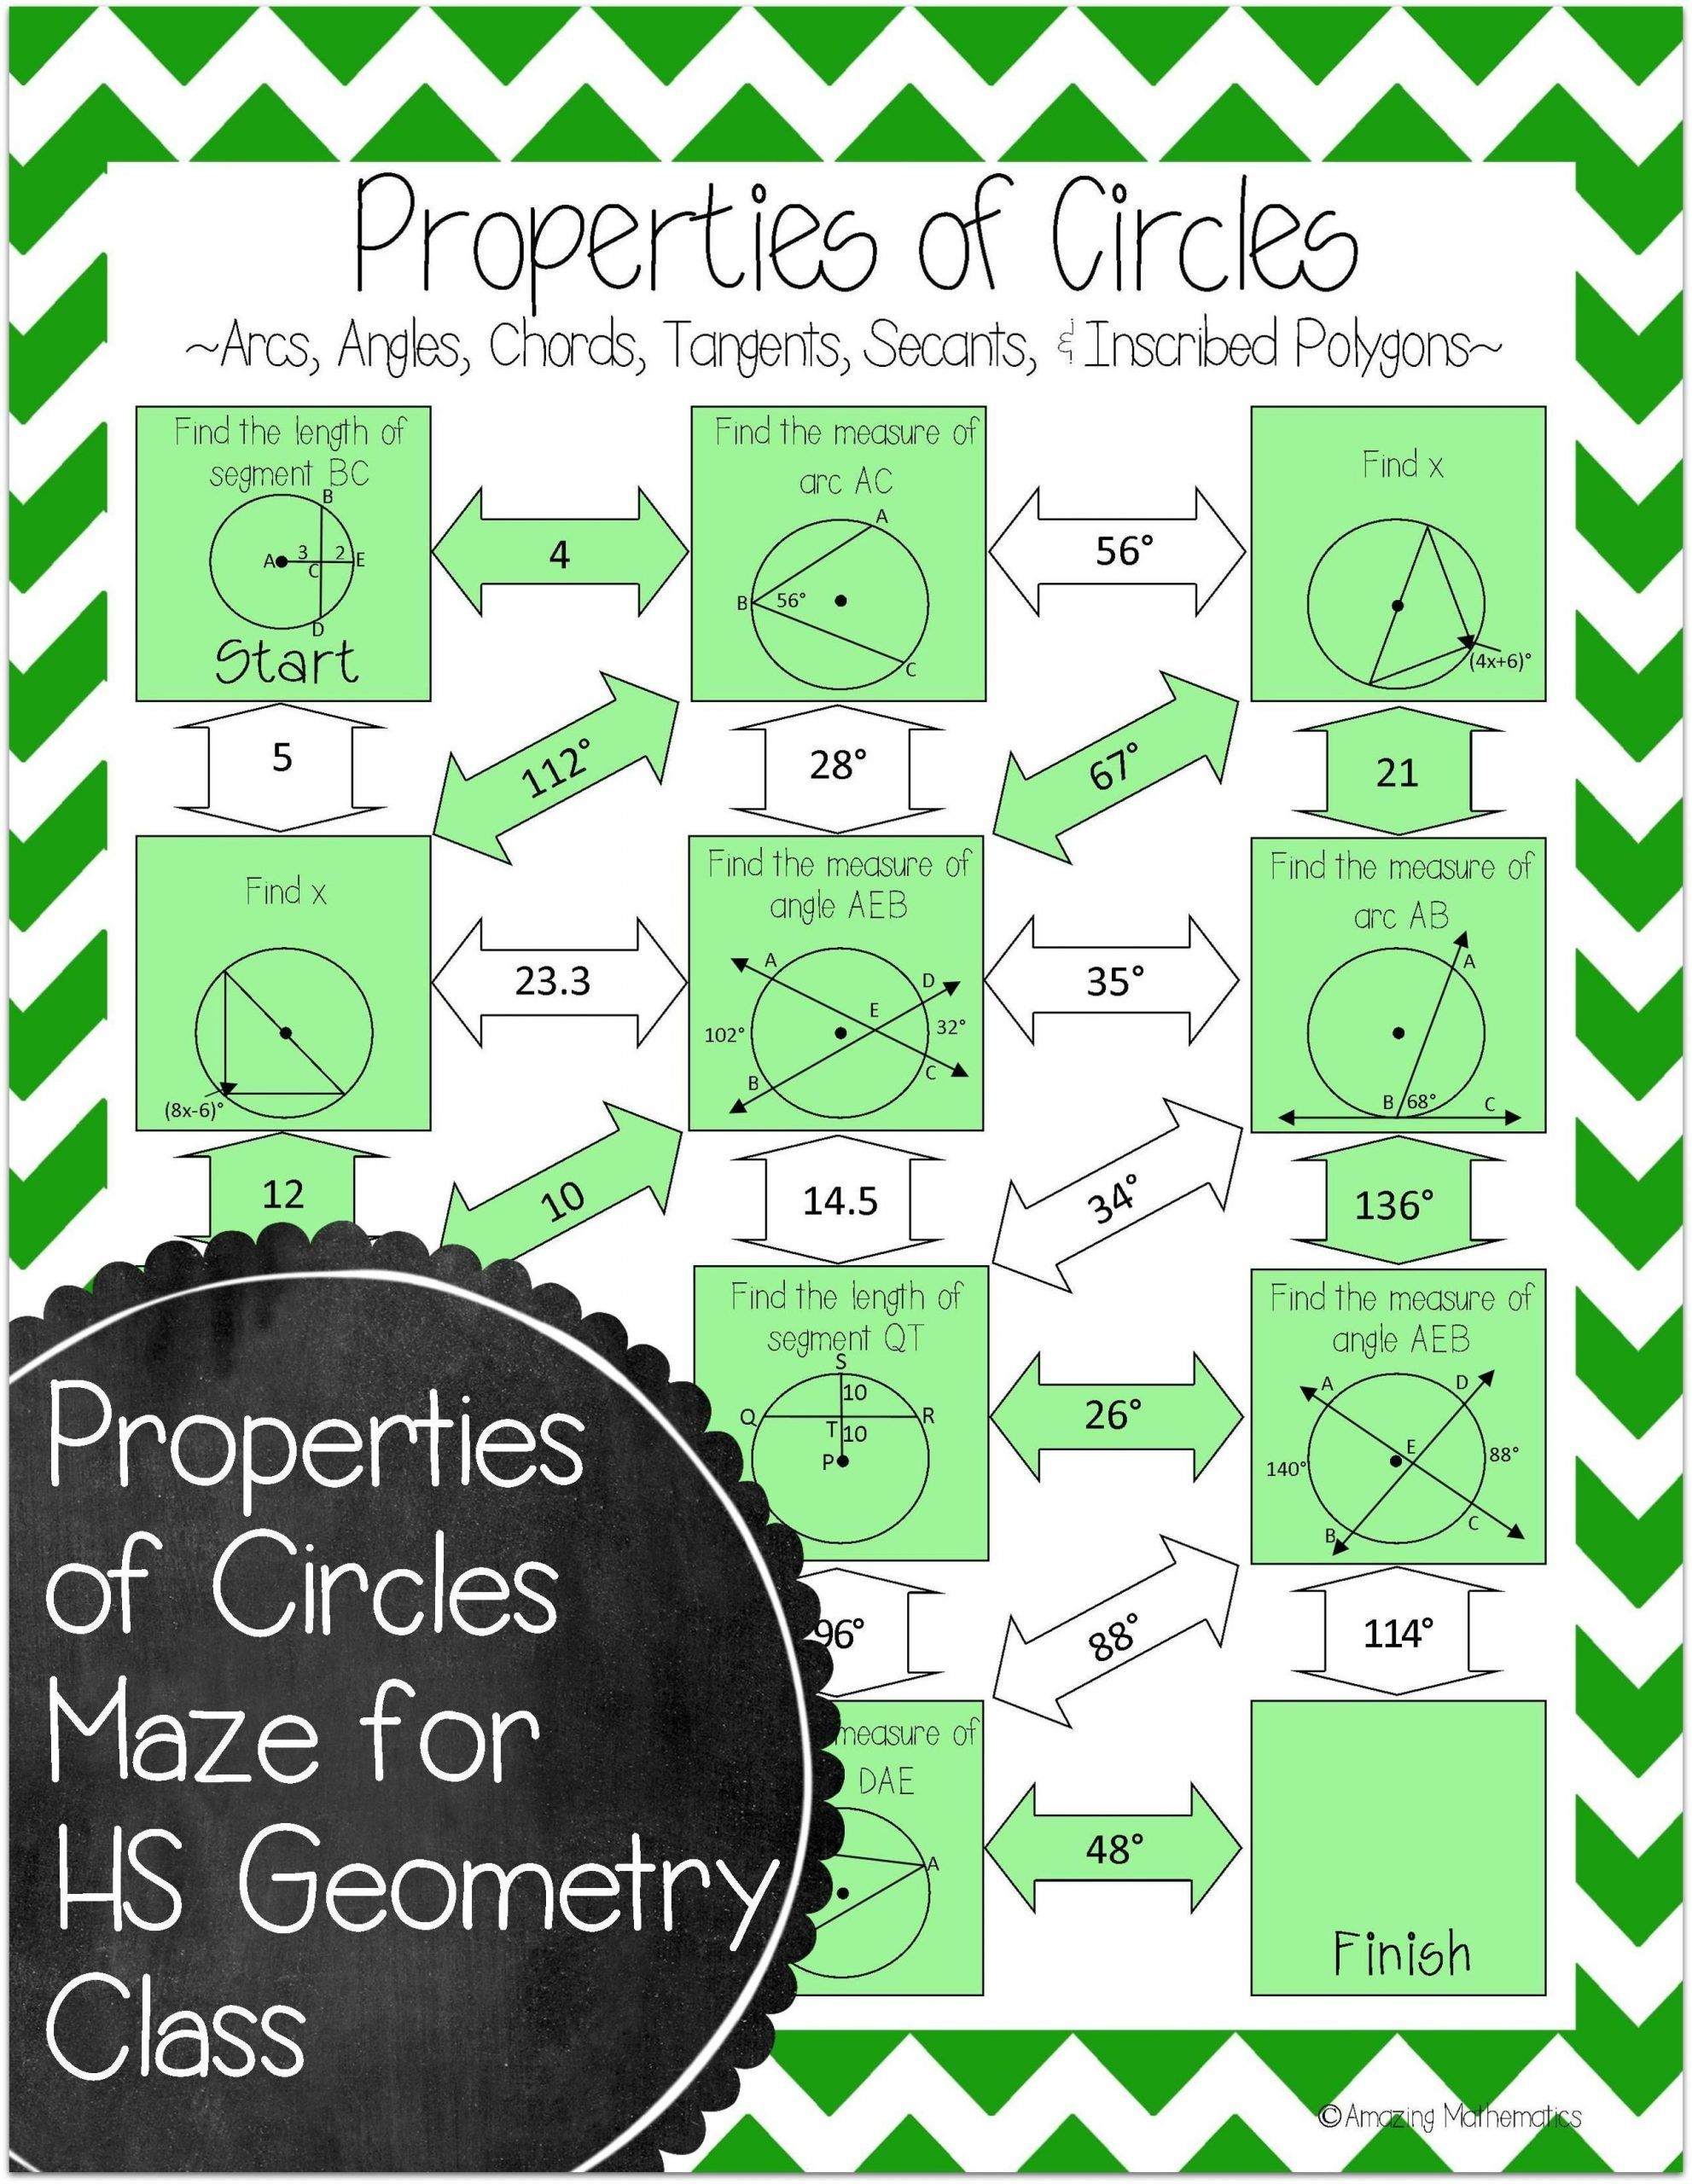 Angles In A Circle Worksheet With Answers